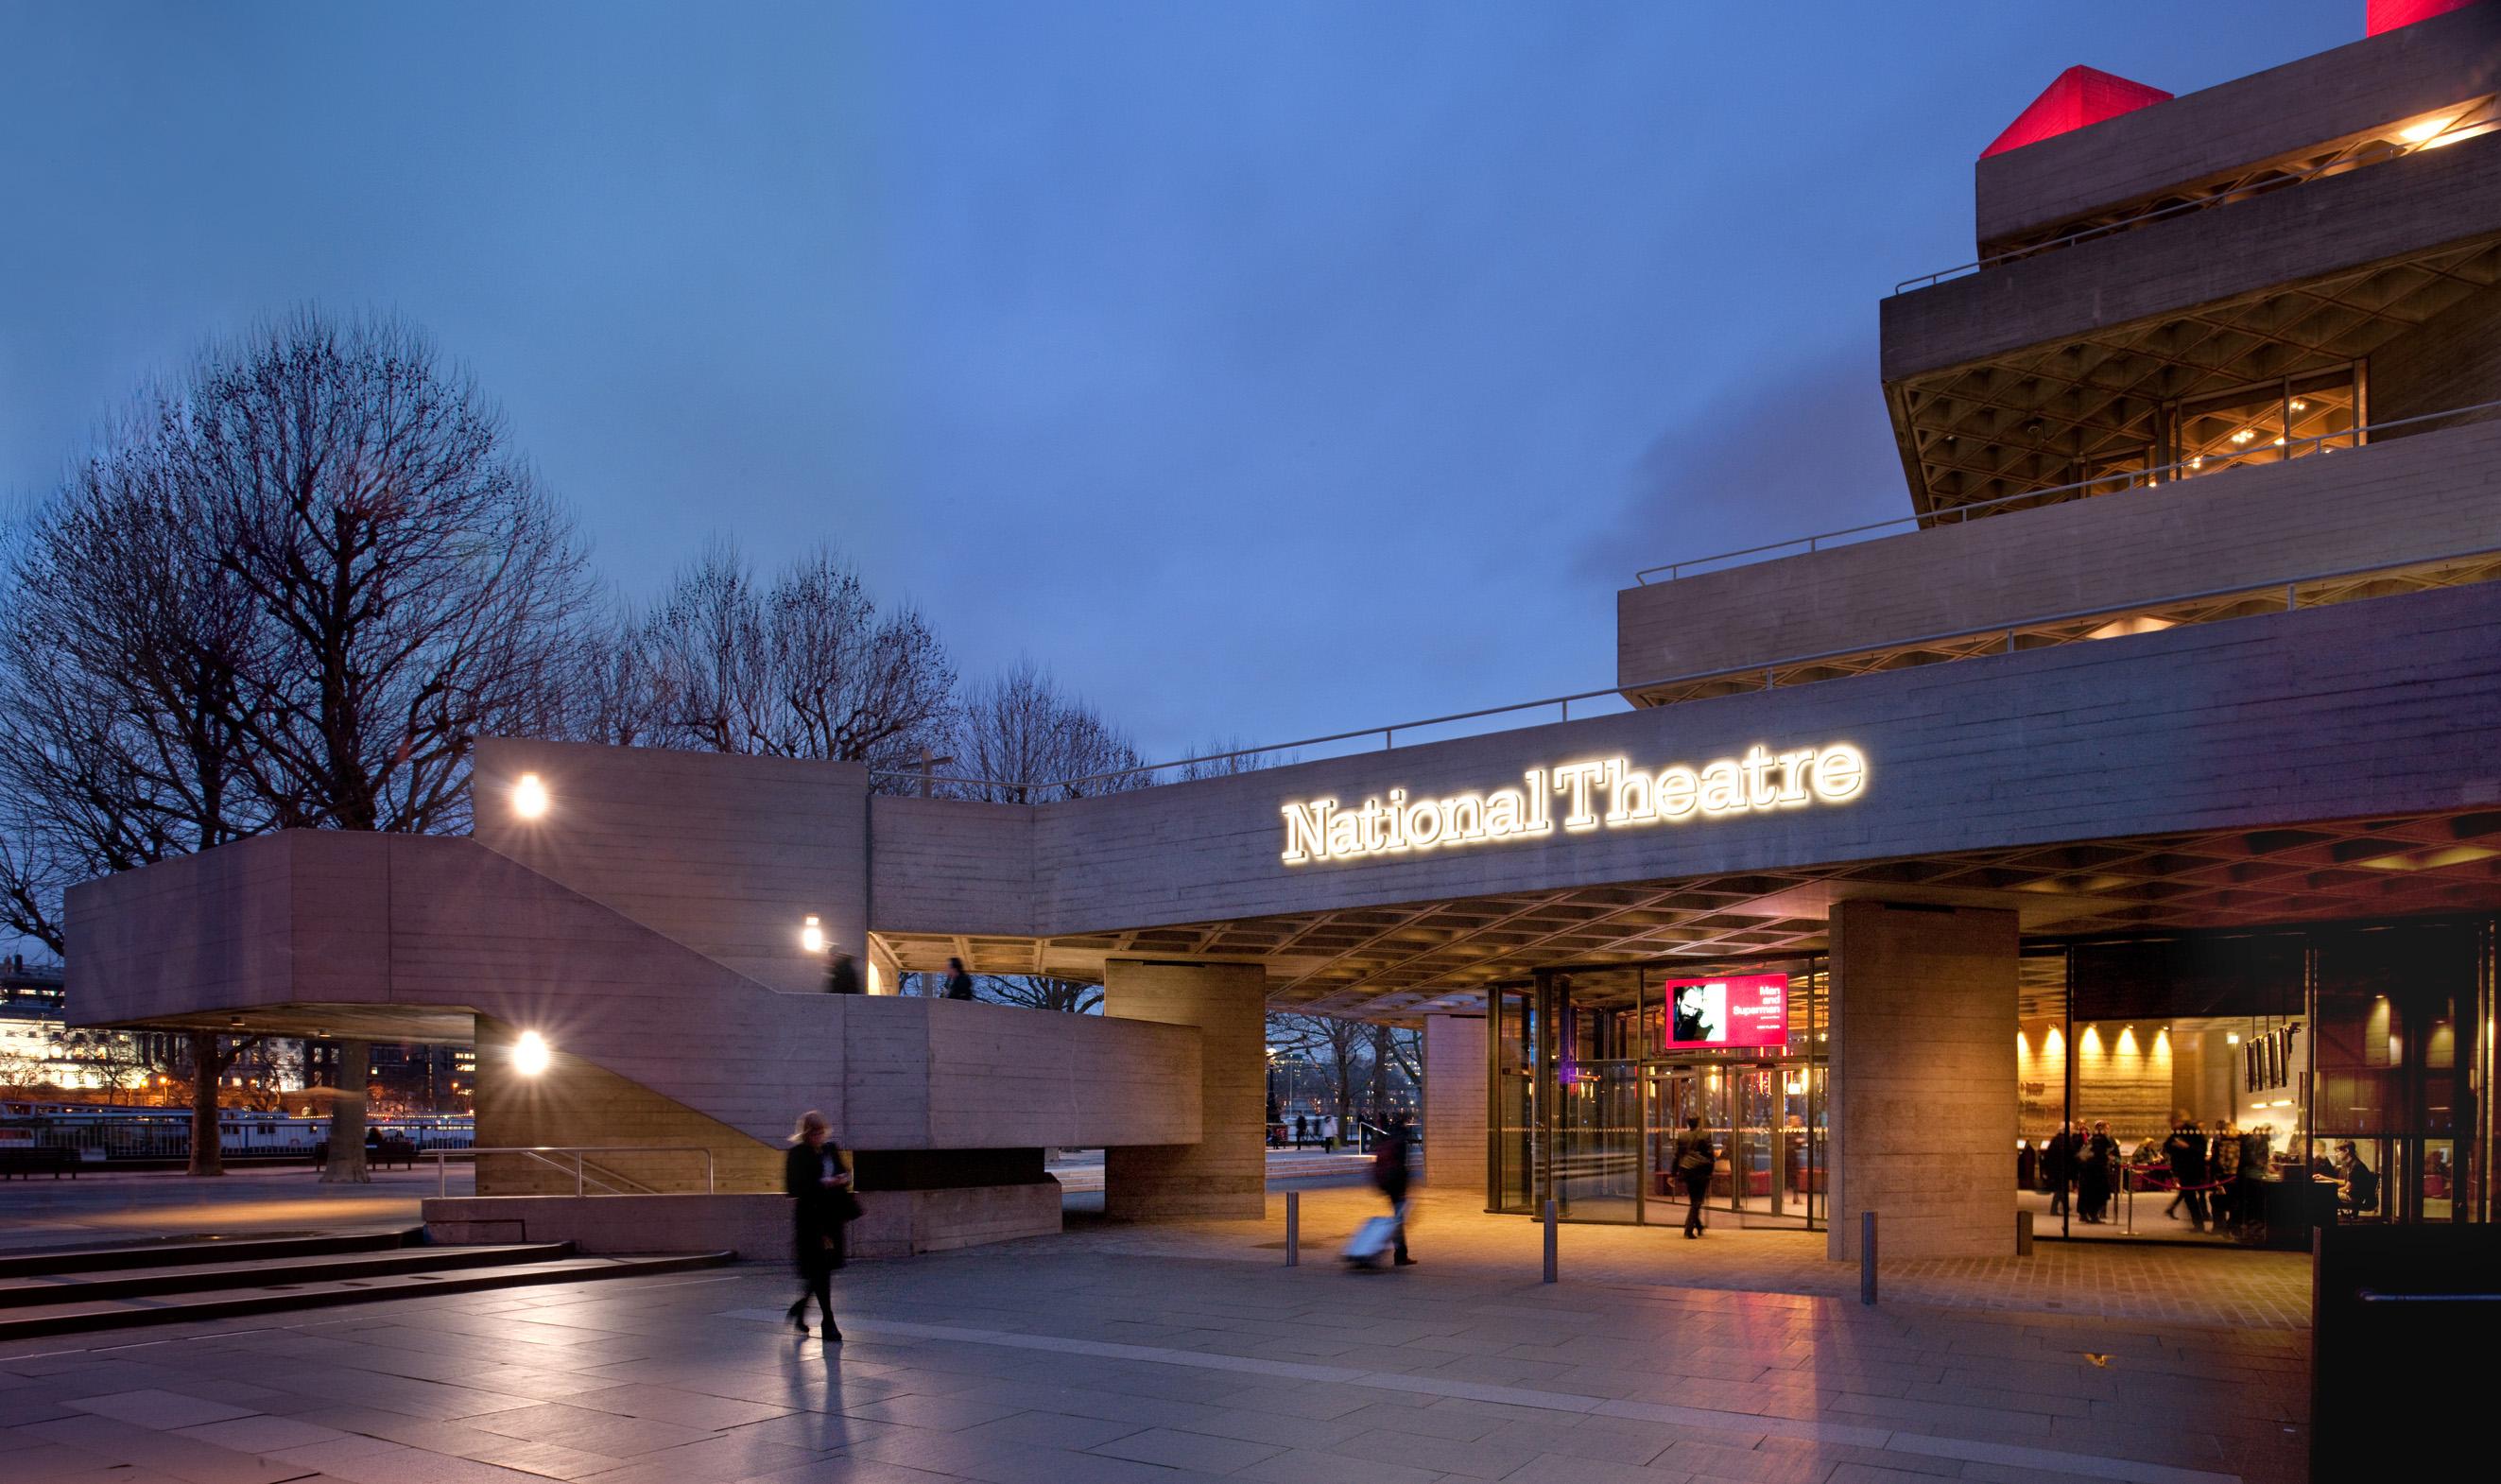 NT Entrance March 2015. Photo by Philip Vile